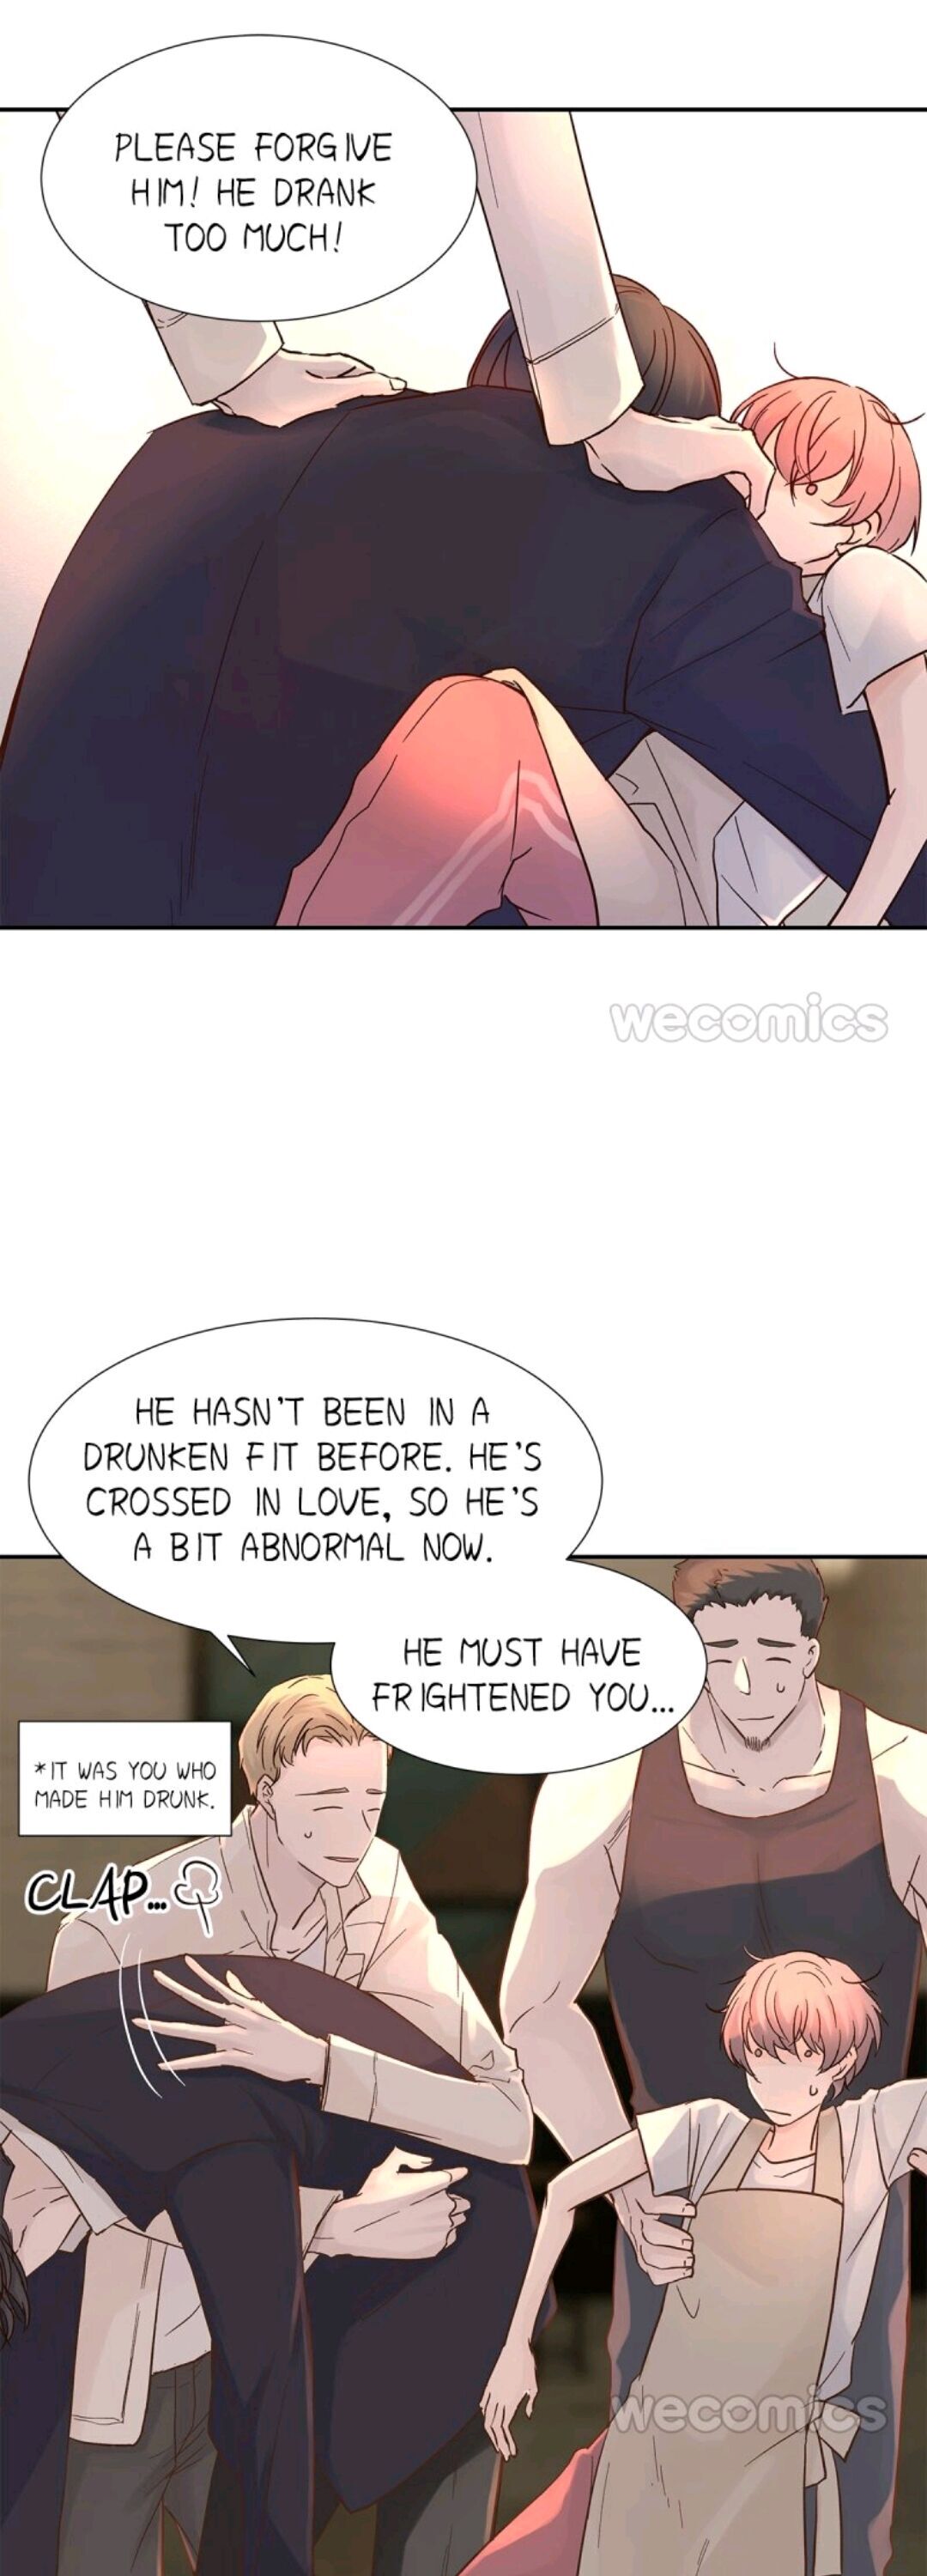 A Tough First Love - Page 2